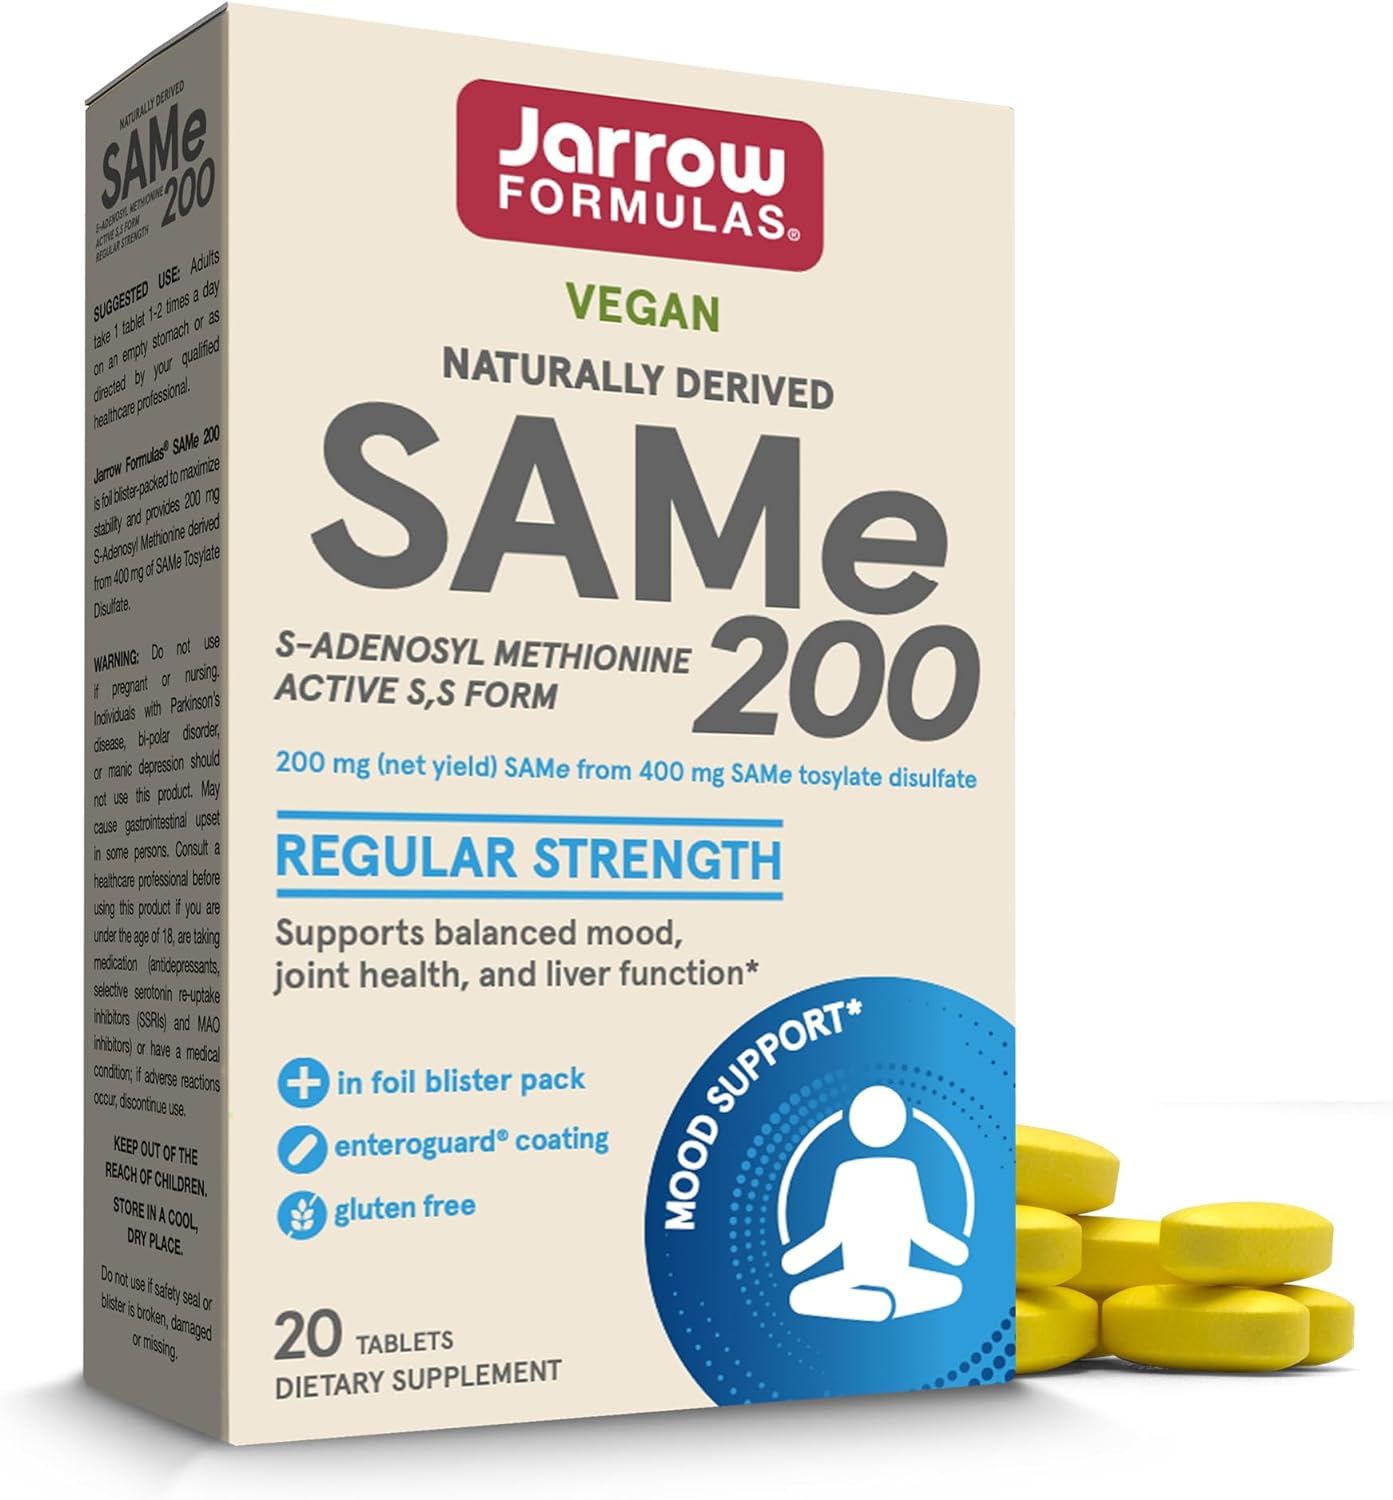 Jarrow Formulas SAMe 200 mg - 20 Tablets - Highest Concentration of Active S,S Form - Supports Joint